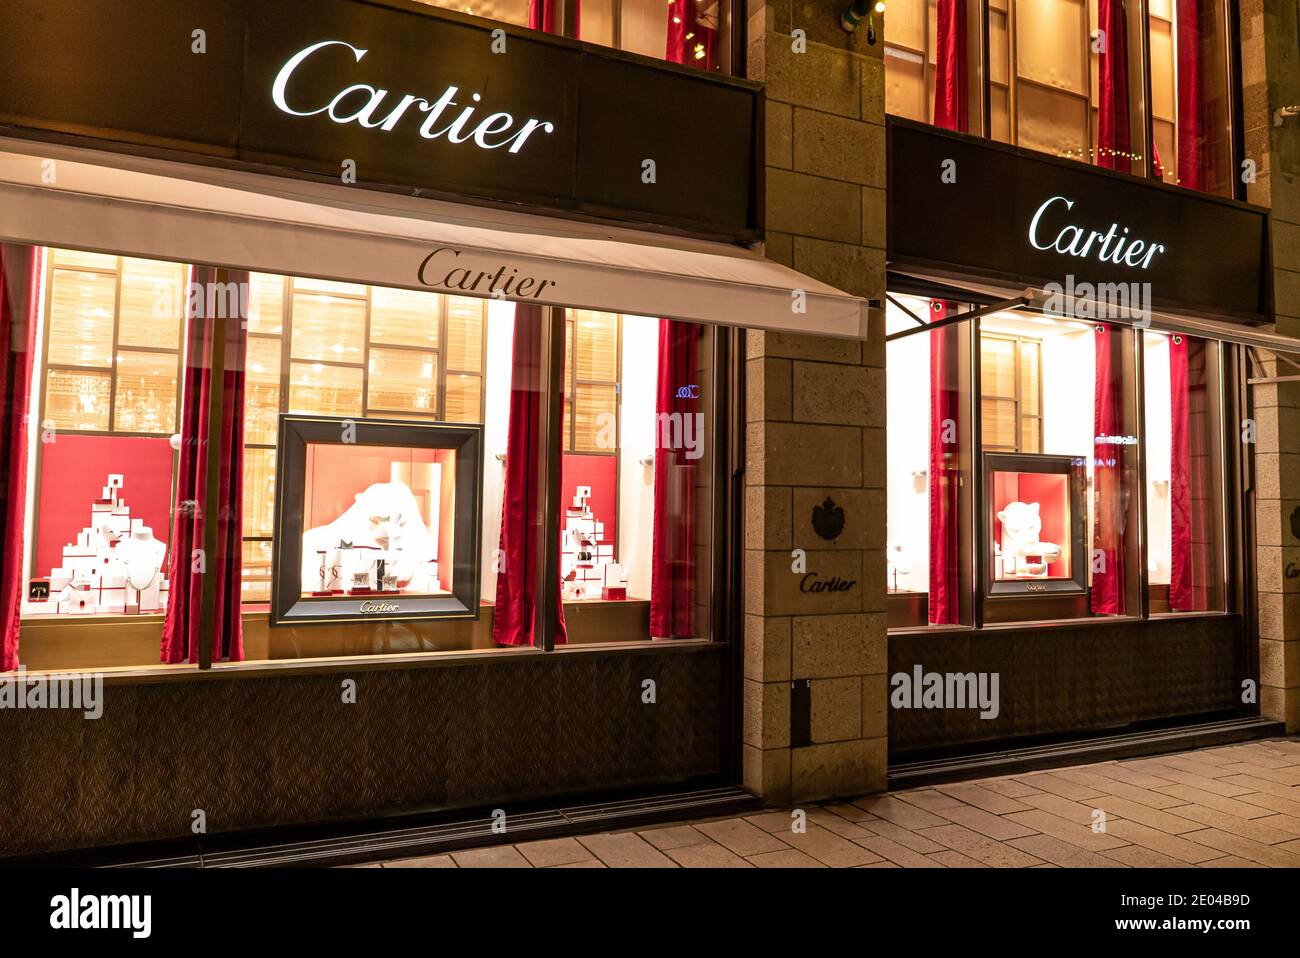 cartier store germany